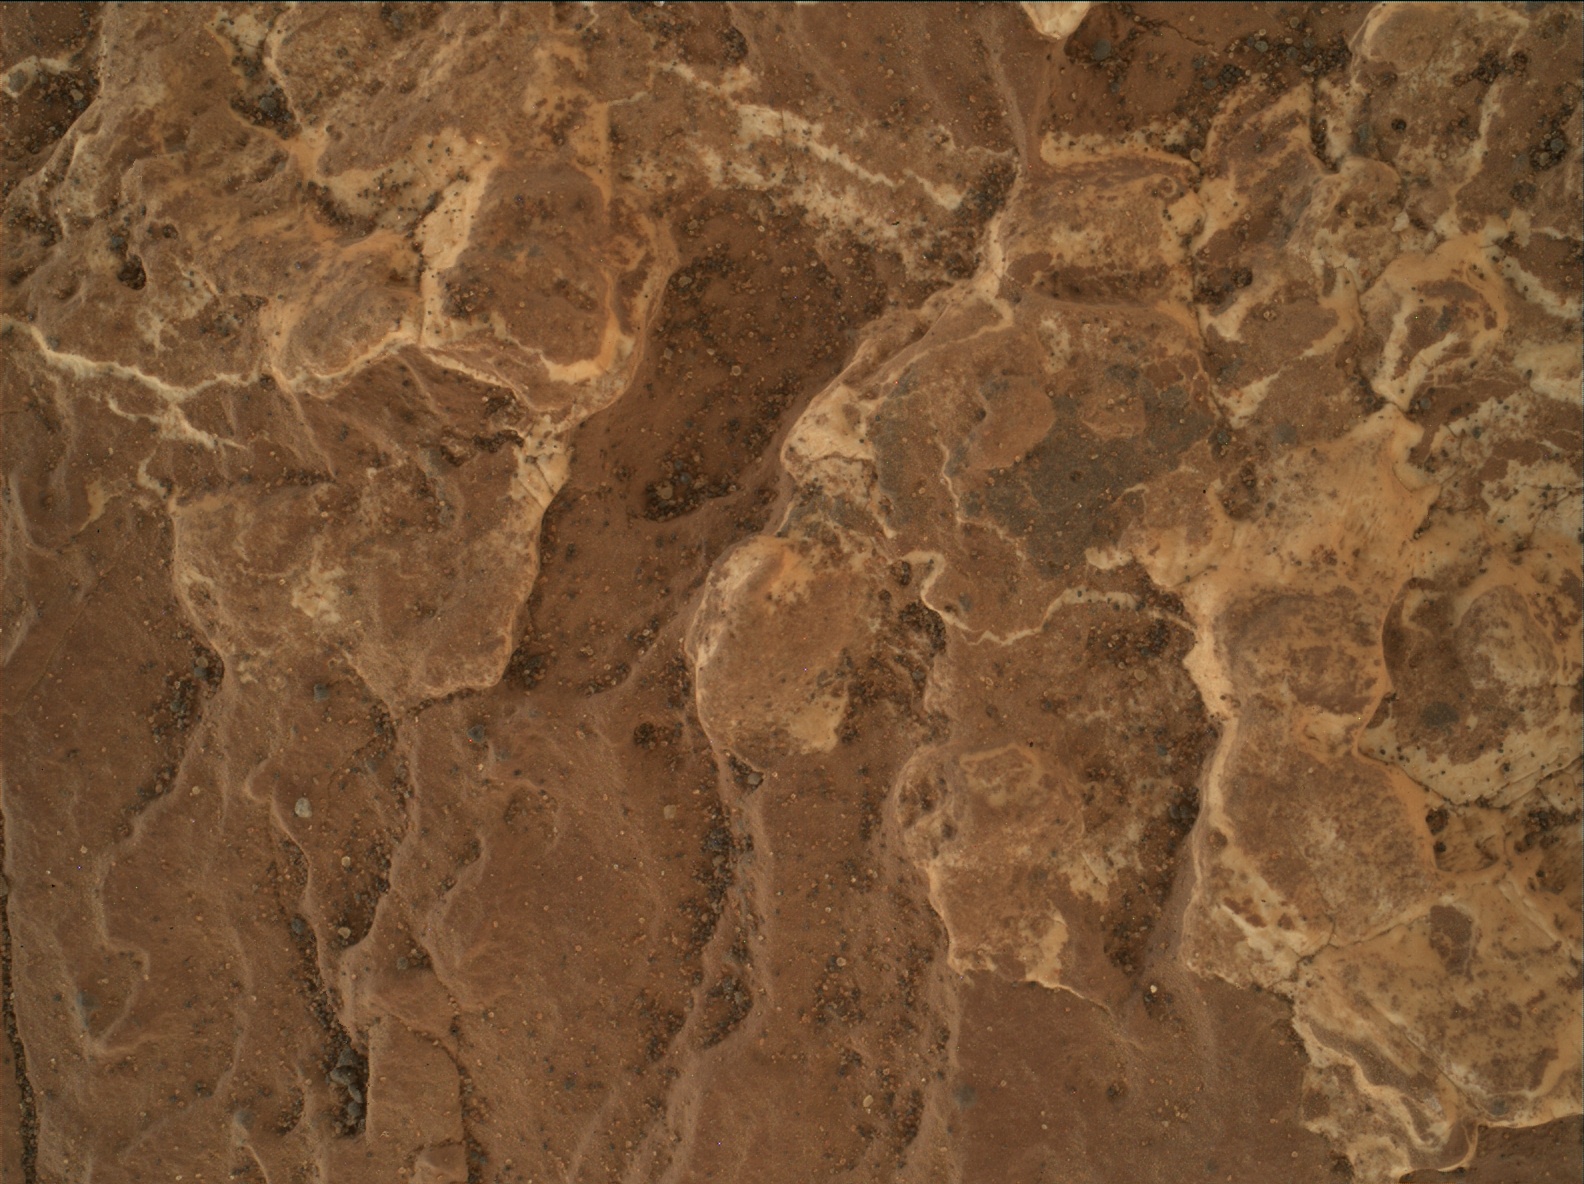 Nasa's Mars rover Curiosity acquired this image using its Mars Hand Lens Imager (MAHLI) on Sol 1647